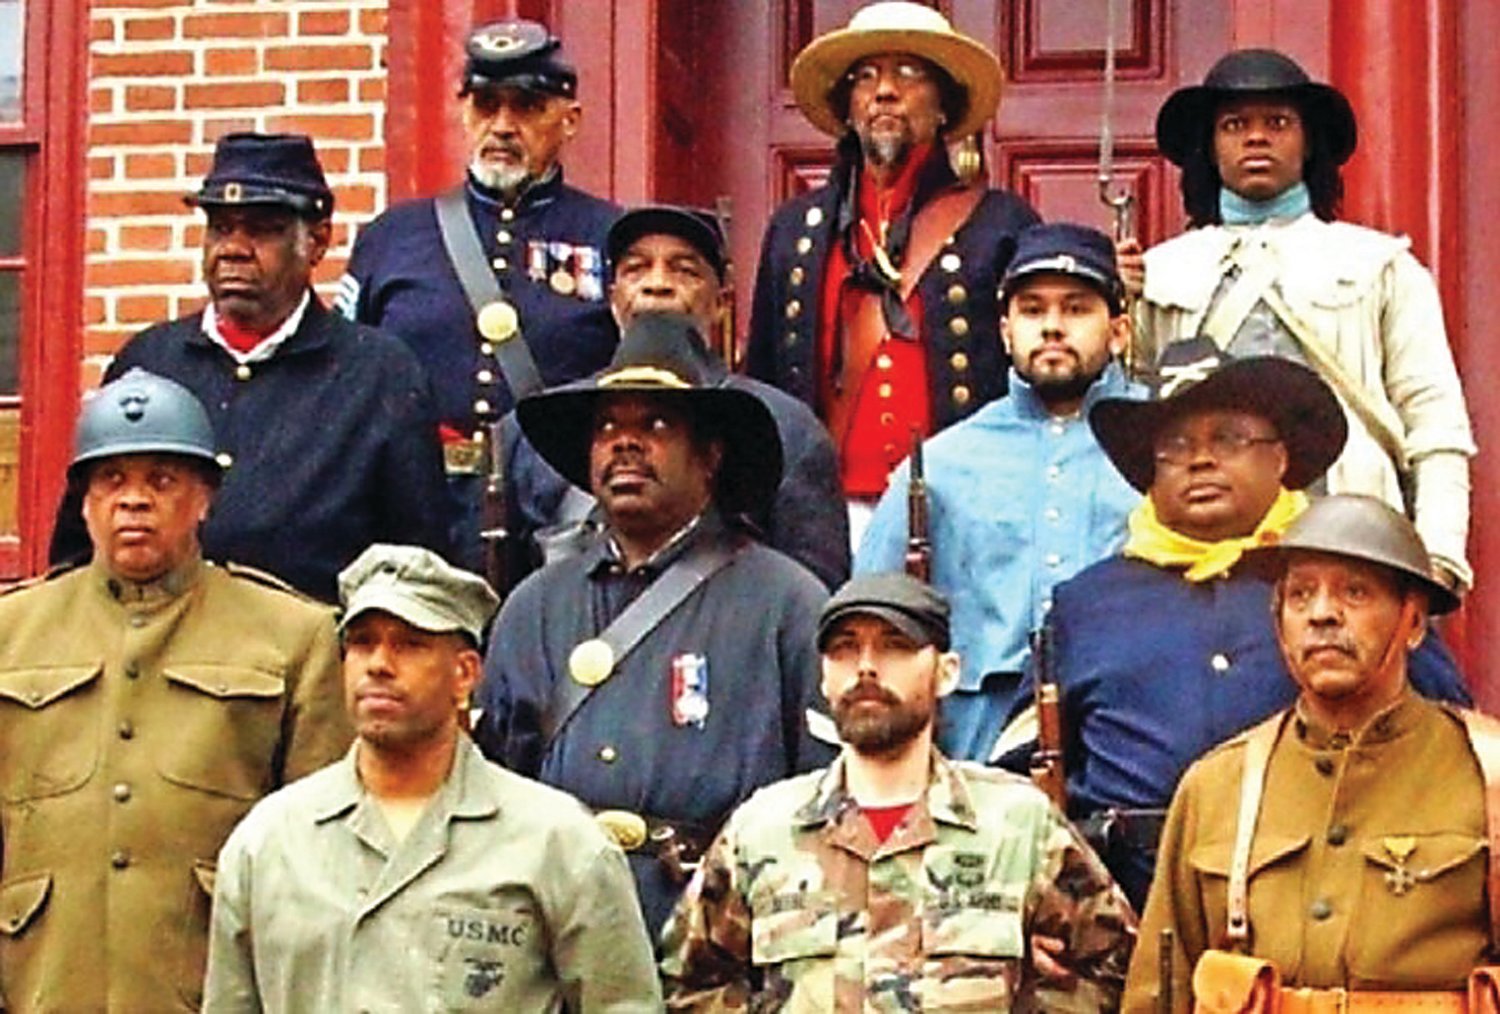 Old Barracks Museum in Trenton, N.J., hosts  vivid living history program on the contributions of African American Soldiers, Sailors, and Airmen to the military history of the United States.